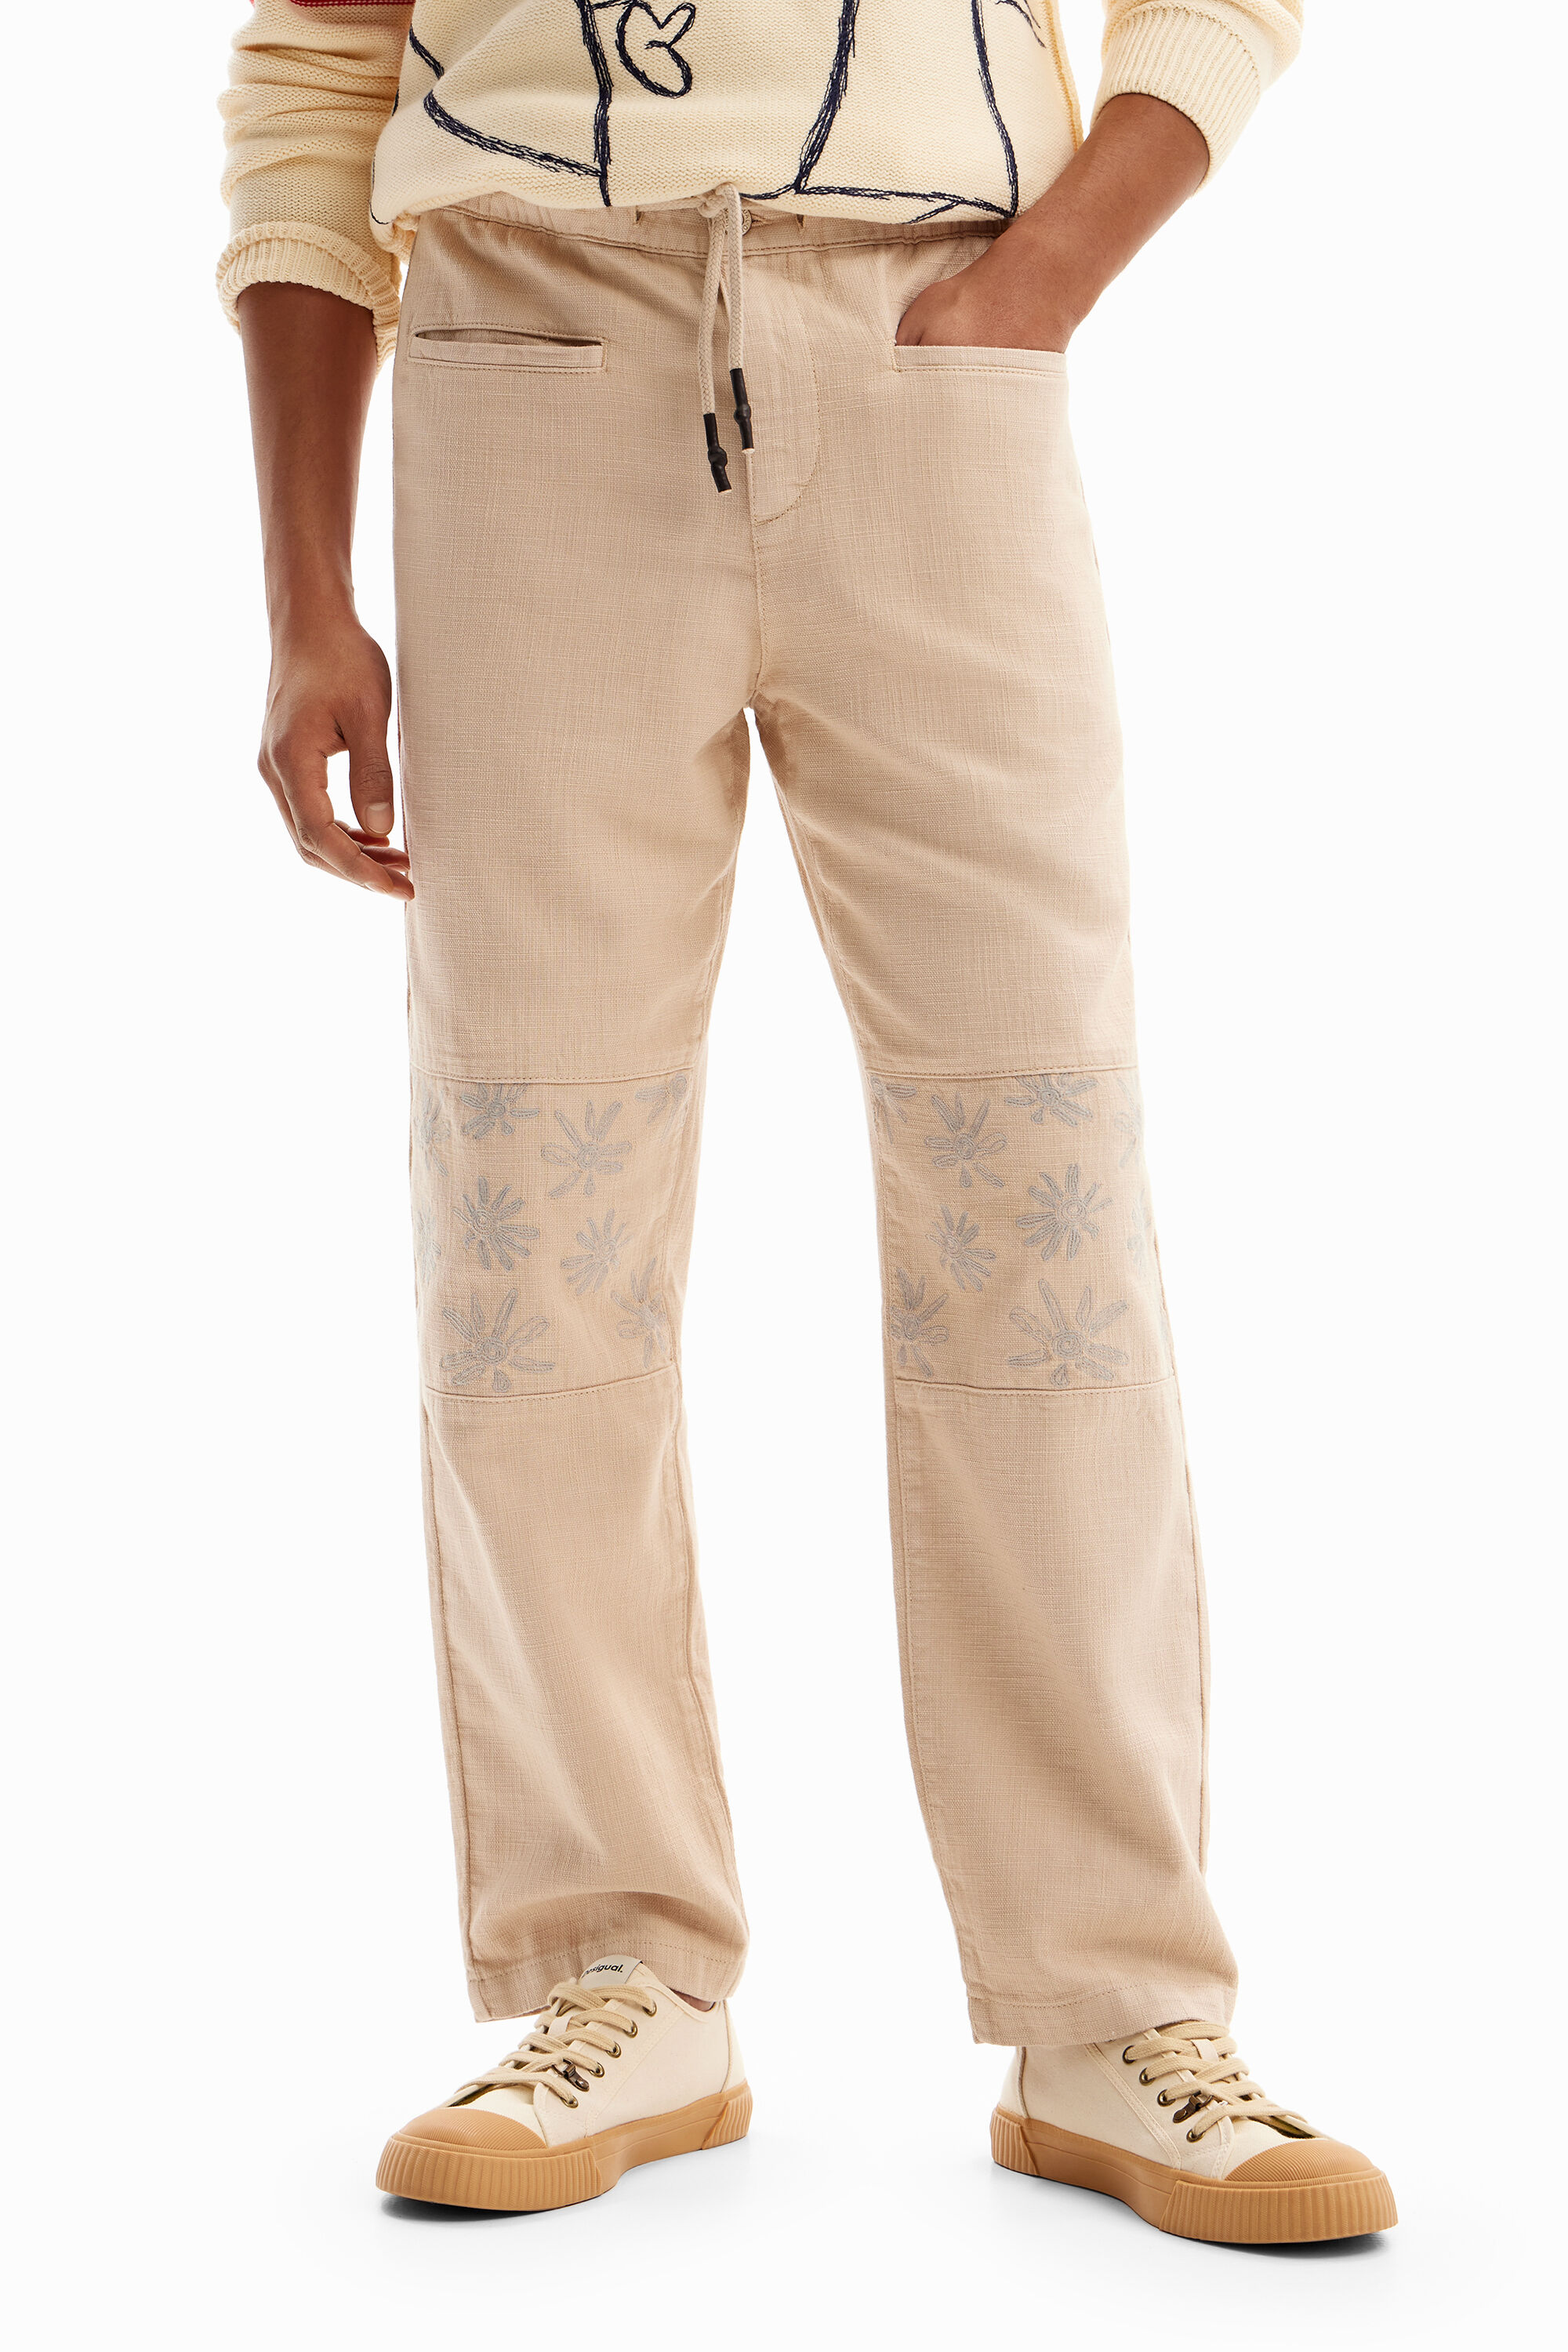 Desigual Trousers with floral details